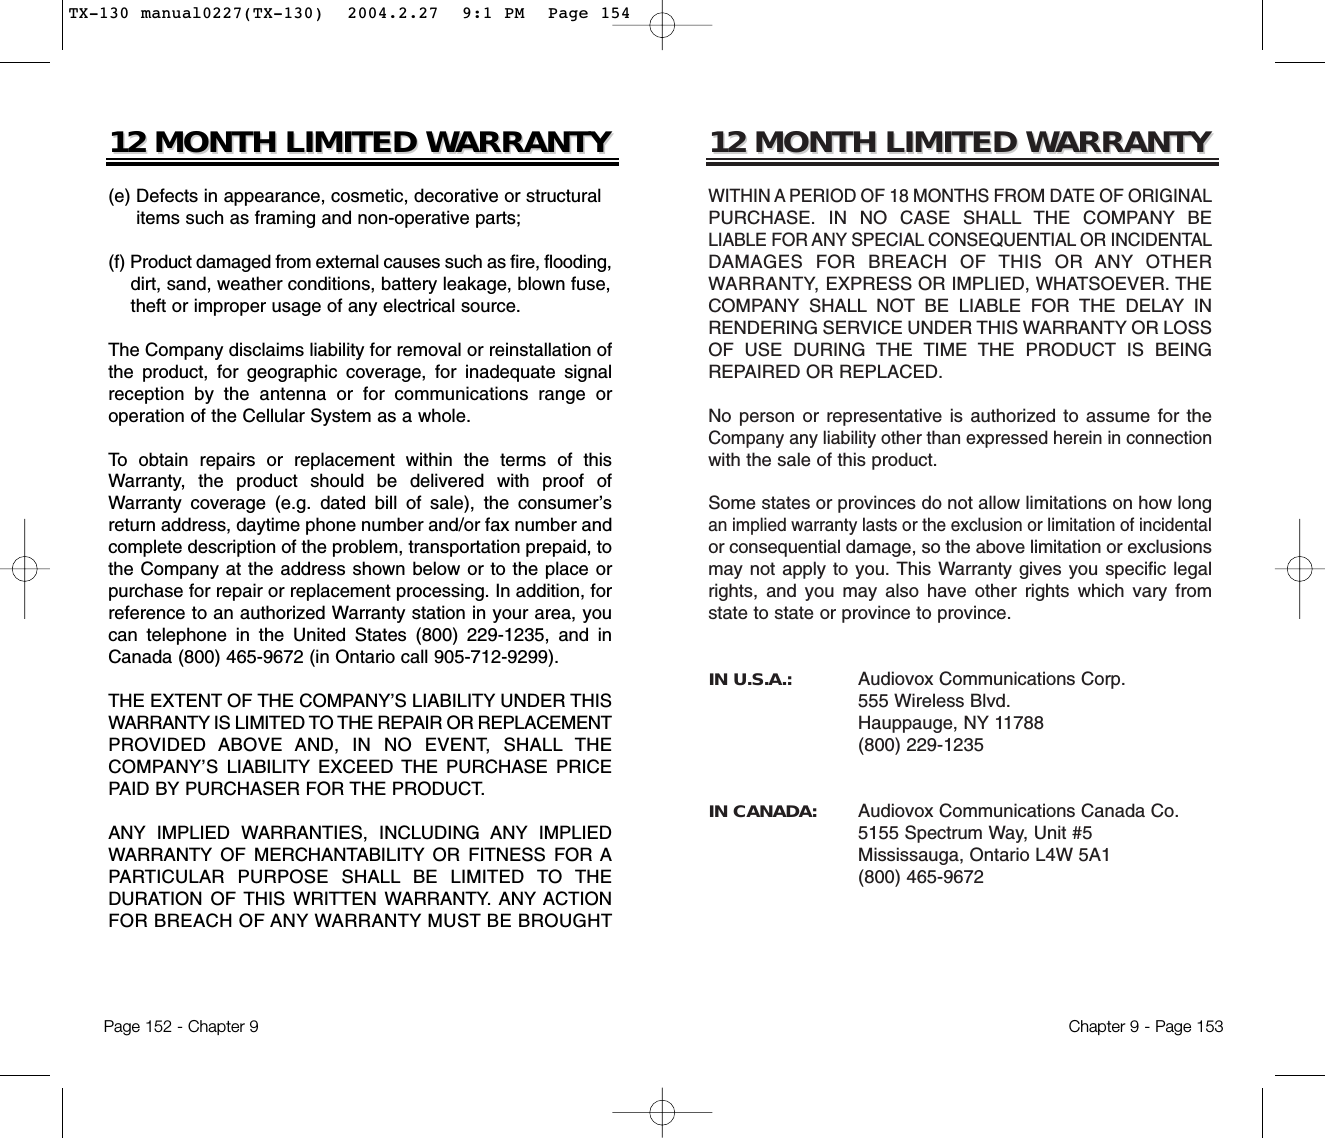 12 MONTH LIMITED W12 MONTH LIMITED WARRANTYARRANTYWITHIN A PERIOD OF 18 MONTHS FROM DATE OF ORIGINALPURCHASE. IN NO CASE SHALL THE COMPANY BELIABLE FOR ANY SPECIAL CONSEQUENTIAL OR INCIDENTALDAMAGES FOR BREACH OF THIS OR ANY OTHERWARRANTY, EXPRESS OR IMPLIED, WHATSOEVER. THECOMPANY SHALL NOT BE LIABLE FOR THE DELAY INRENDERING SERVICE UNDER THIS WARRANTY OR LOSSOF USE DURING THE TIME THE PRODUCT IS BEINGREPAIRED OR REPLACED.No person or representative is authorized to assume for theCompany any liability other than expressed herein in connectionwith the sale of this product.Some states or provinces do not allow limitations on how longan implied warranty lasts or the exclusion or limitation of incidentalor consequential damage, so the above limitation or exclusionsmay not apply to you. This Warranty gives you specific legalrights, and you may also have other rights which vary fromstate to state or province to province.IN U.S.A.:    Audiovox Communications Corp.555 Wireless Blvd.Hauppauge, NY 11788(800) 229-1235IN CANADA:    Audiovox Communications Canada Co. 5155 Spectrum Way, Unit #5Mississauga, Ontario L4W 5A1(800) 465-9672Chapter 9 - Page 15312 MONTH LIMITED W12 MONTH LIMITED WARRANTYARRANTY(e) Defects in appearance, cosmetic, decorative or structural items such as framing and non-operative parts;(f) Product damaged from external causes such as fire, flooding,dirt, sand, weather conditions, battery leakage, blown fuse, theft or improper usage of any electrical source. The Company disclaims liability for removal or reinstallation ofthe product, for geographic coverage, for inadequate signalreception by the antenna or for communications range oroperation of the Cellular System as a whole.To obtain repairs or replacement within the terms of thisWarranty, the product should be delivered with proof ofWarranty coverage (e.g. dated bill of sale), the consumer’sreturn address, daytime phone number and/or fax number andcomplete description of the problem, transportation prepaid, tothe Company at the address shown below or to the place orpurchase for repair or replacement processing. In addition, forreference to an authorized Warranty station in your area, youcan telephone in the United States (800) 229-1235, and inCanada (800) 465-9672 (in Ontario call 905-712-9299).THE EXTENT OF THE COMPANY’S LIABILITY UNDER THISWARRANTY IS LIMITED TO THE REPAIR OR REPLACEMENTPROVIDED ABOVE AND, IN NO EVENT, SHALL THECOMPANY’S LIABILITY EXCEED THE PURCHASE PRICEPAID BY PURCHASER FOR THE PRODUCT. ANY IMPLIED WARRANTIES, INCLUDING ANY IMPLIEDWARRANTY OF MERCHANTABILITY OR FITNESS FOR APARTICULAR PURPOSE SHALL BE LIMITED TO THEDURATION OF THIS WRITTEN WARRANTY. ANY ACTIONFOR BREACH OF ANY WARRANTY MUST BE BROUGHTPage 152 - Chapter 9TX-130 manual0227(TX-130)  2004.2.27  9:1 PM  Page 154